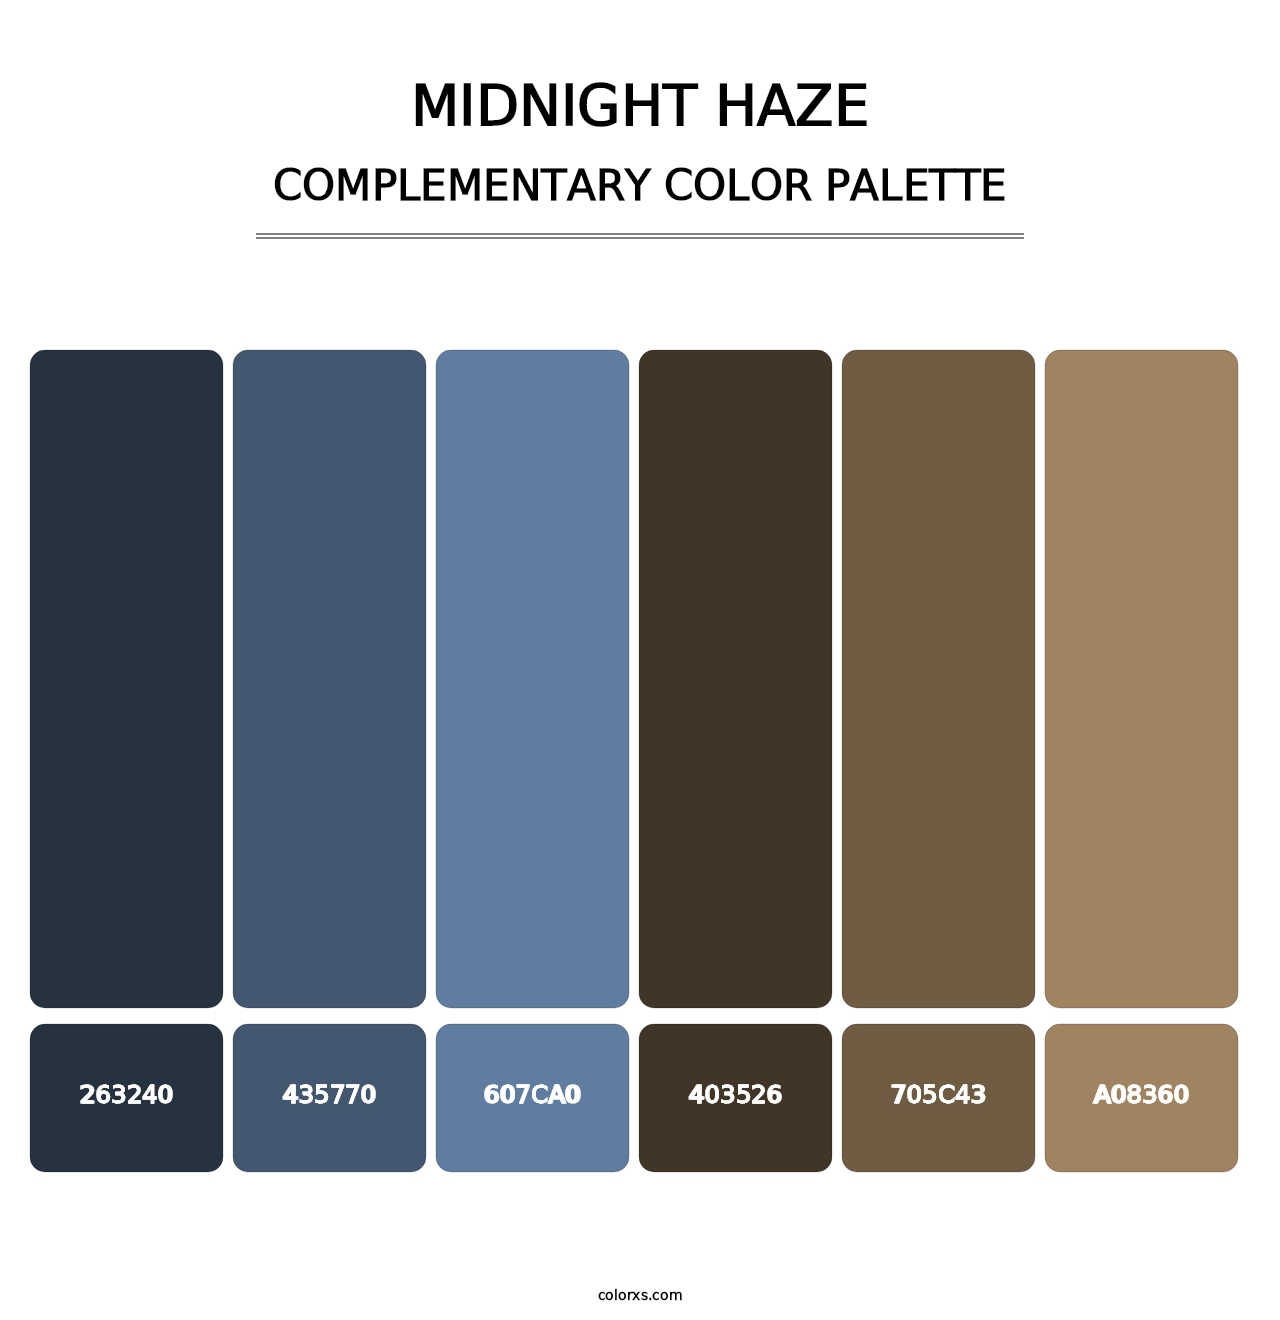 Midnight Haze - Complementary Color Palette